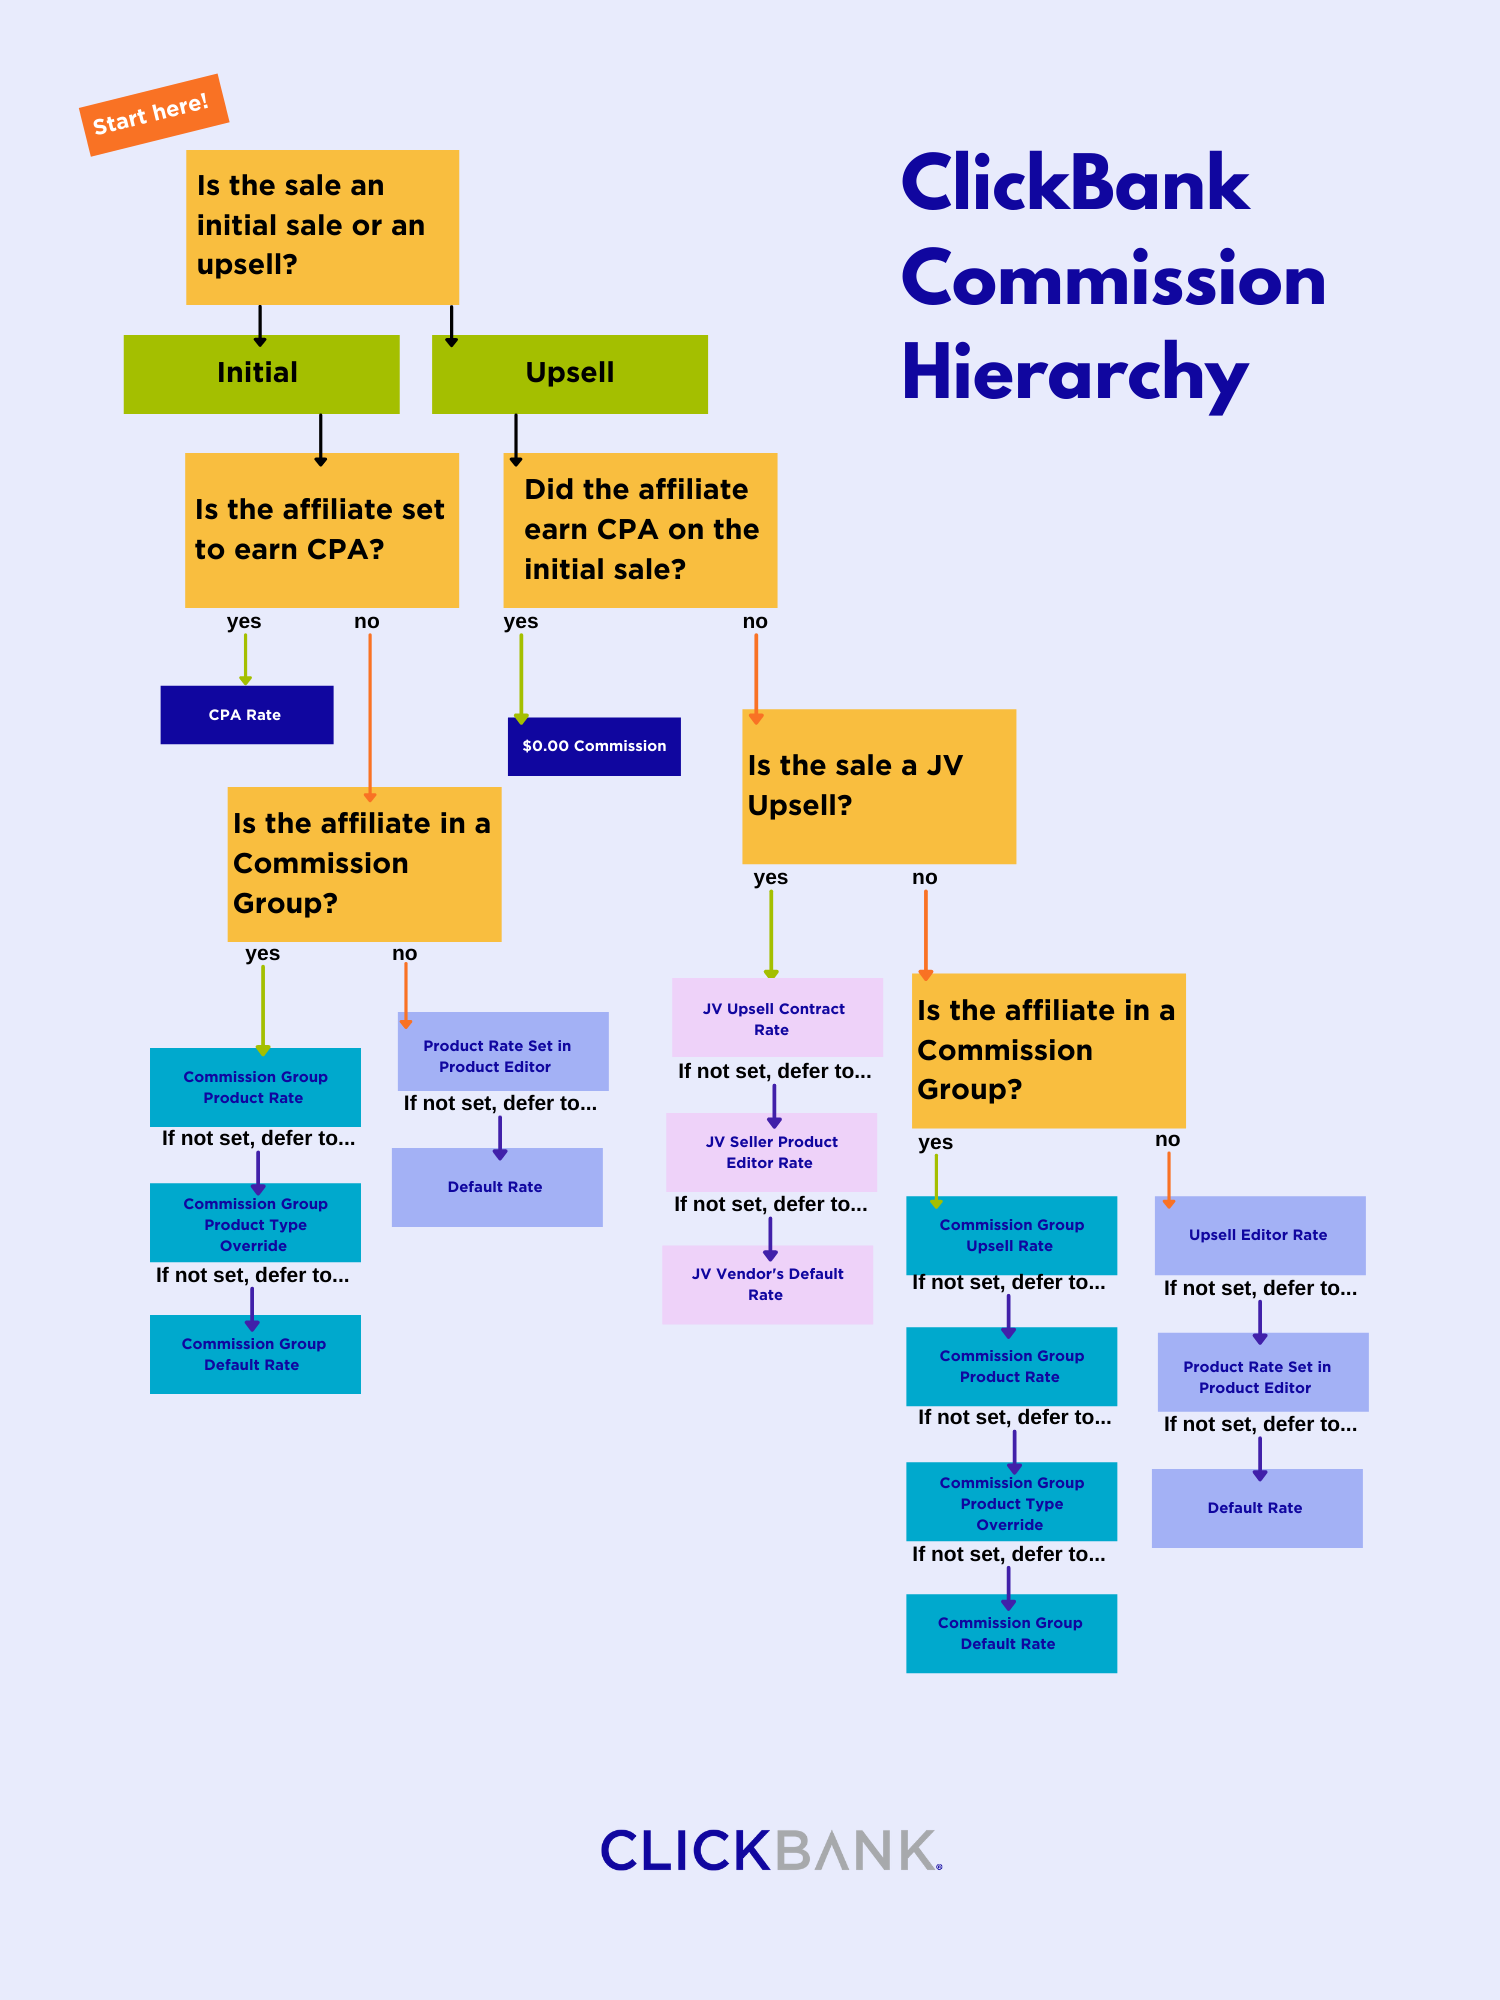 ClickBank_Commission_Hierarchy_V2.png